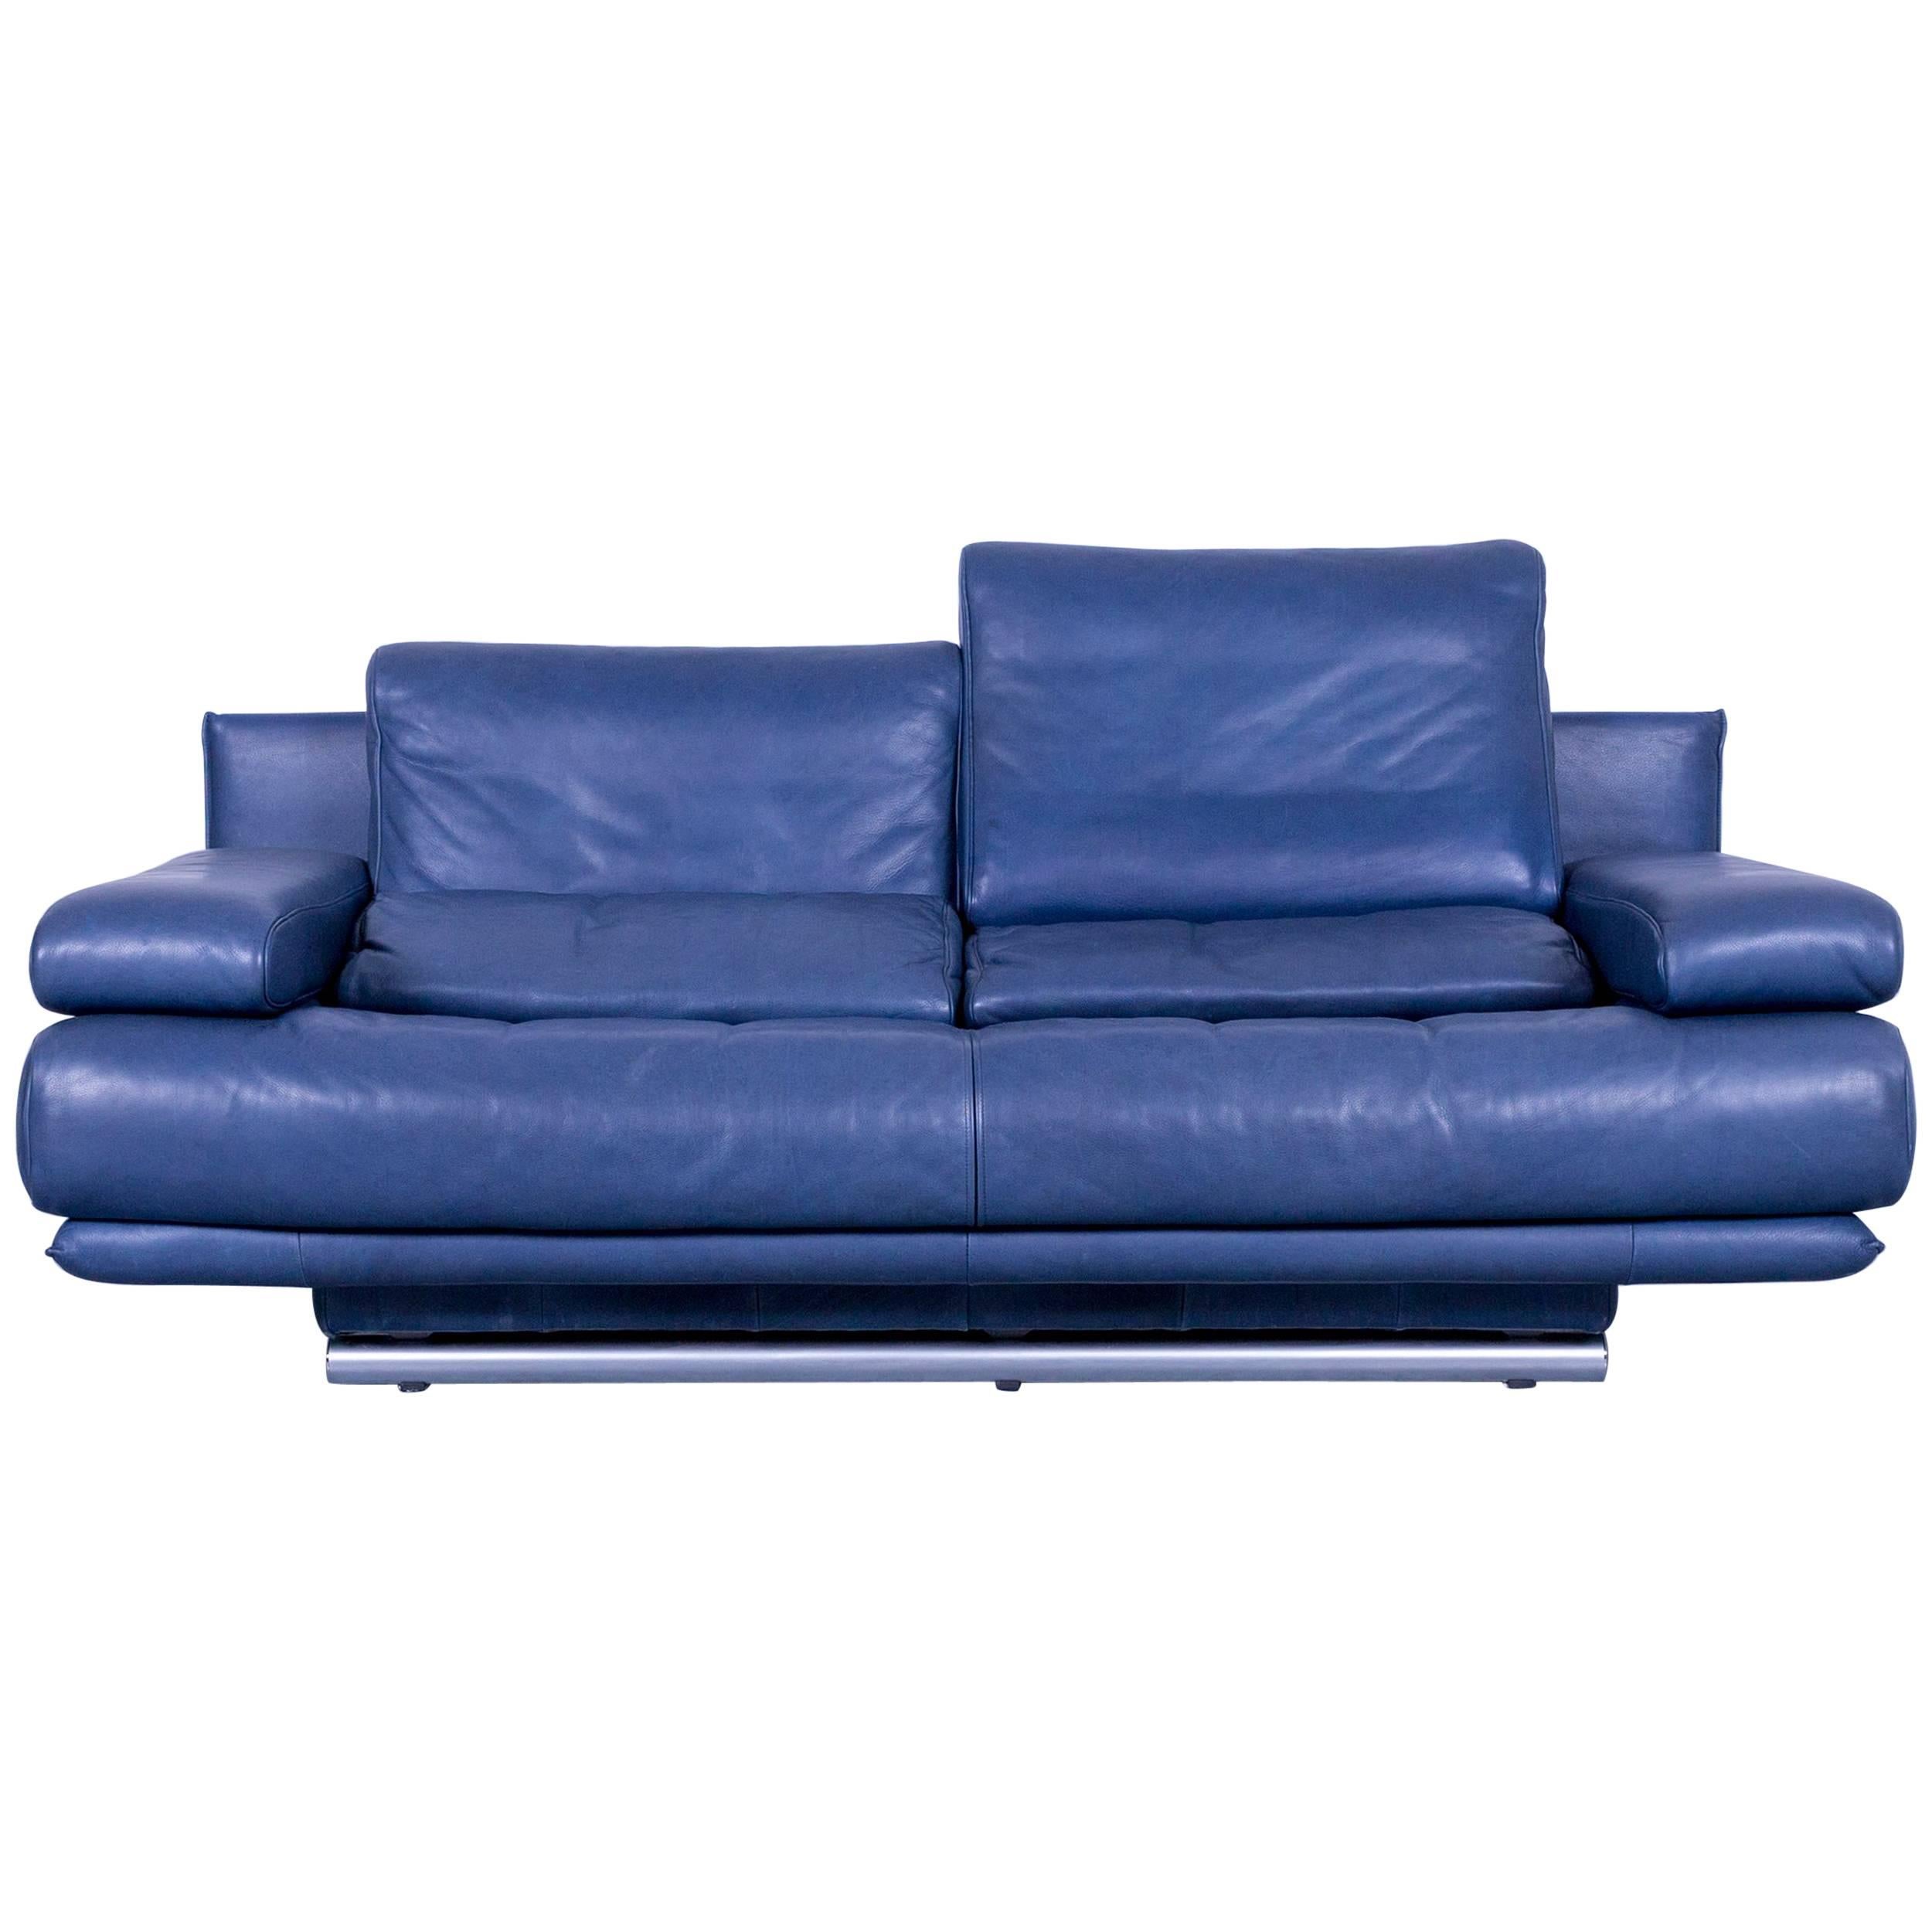 Rolf Benz 6500 Designer Leather Sofa Blue Two-Seat